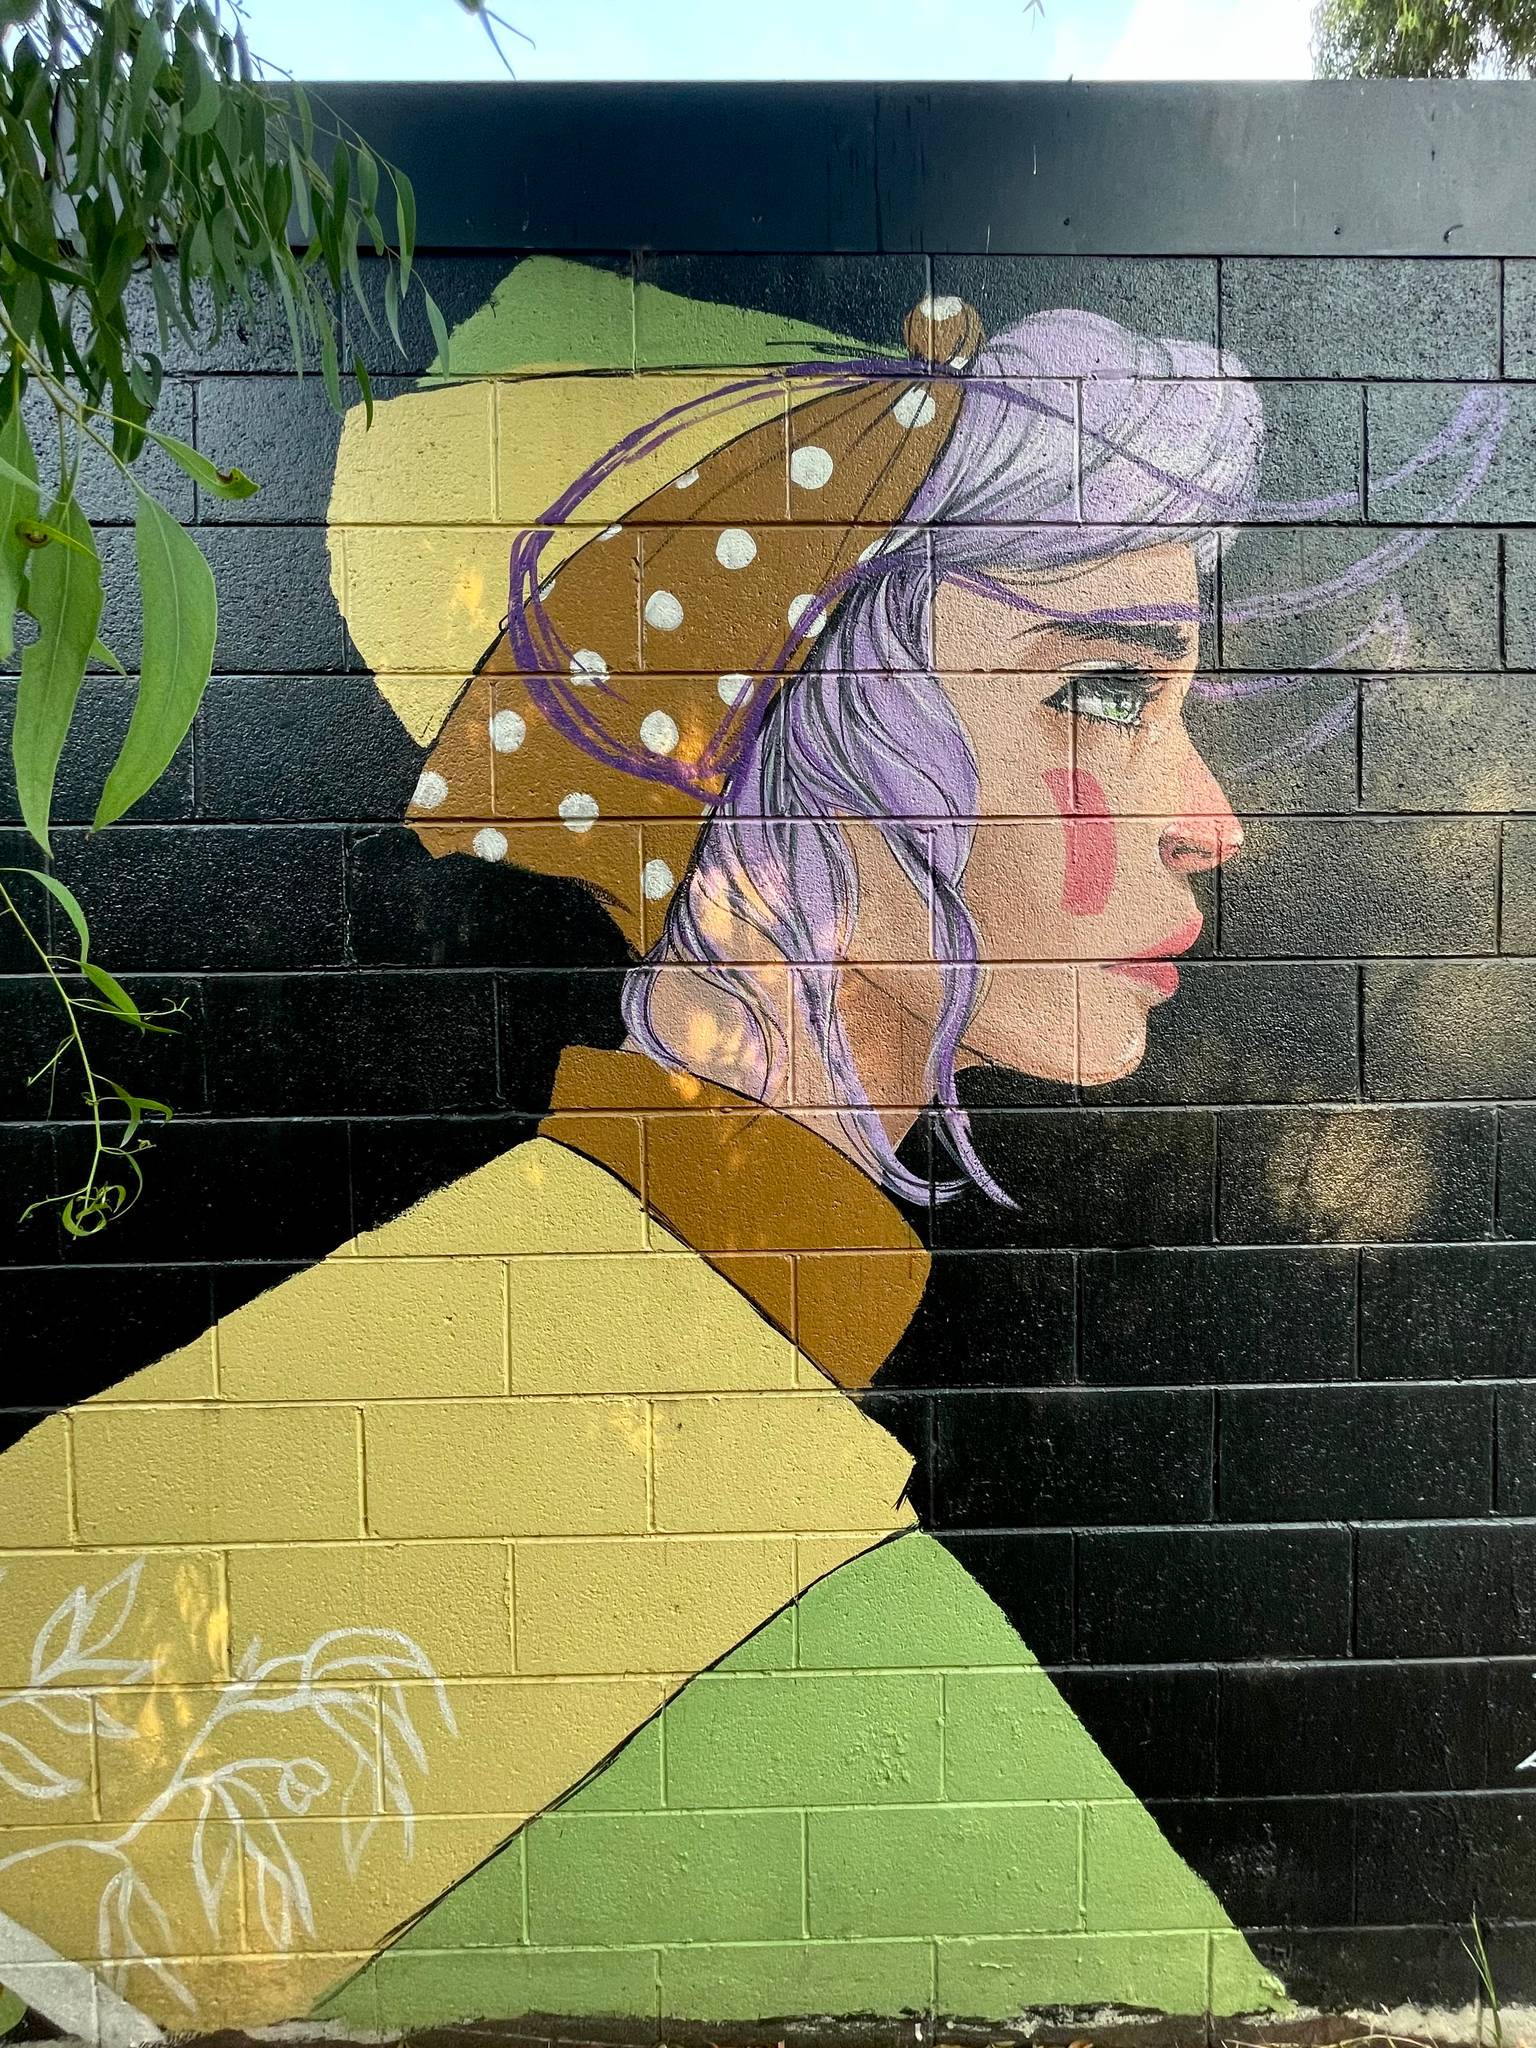 Lucy Lucy&mdash;Smith St Mural